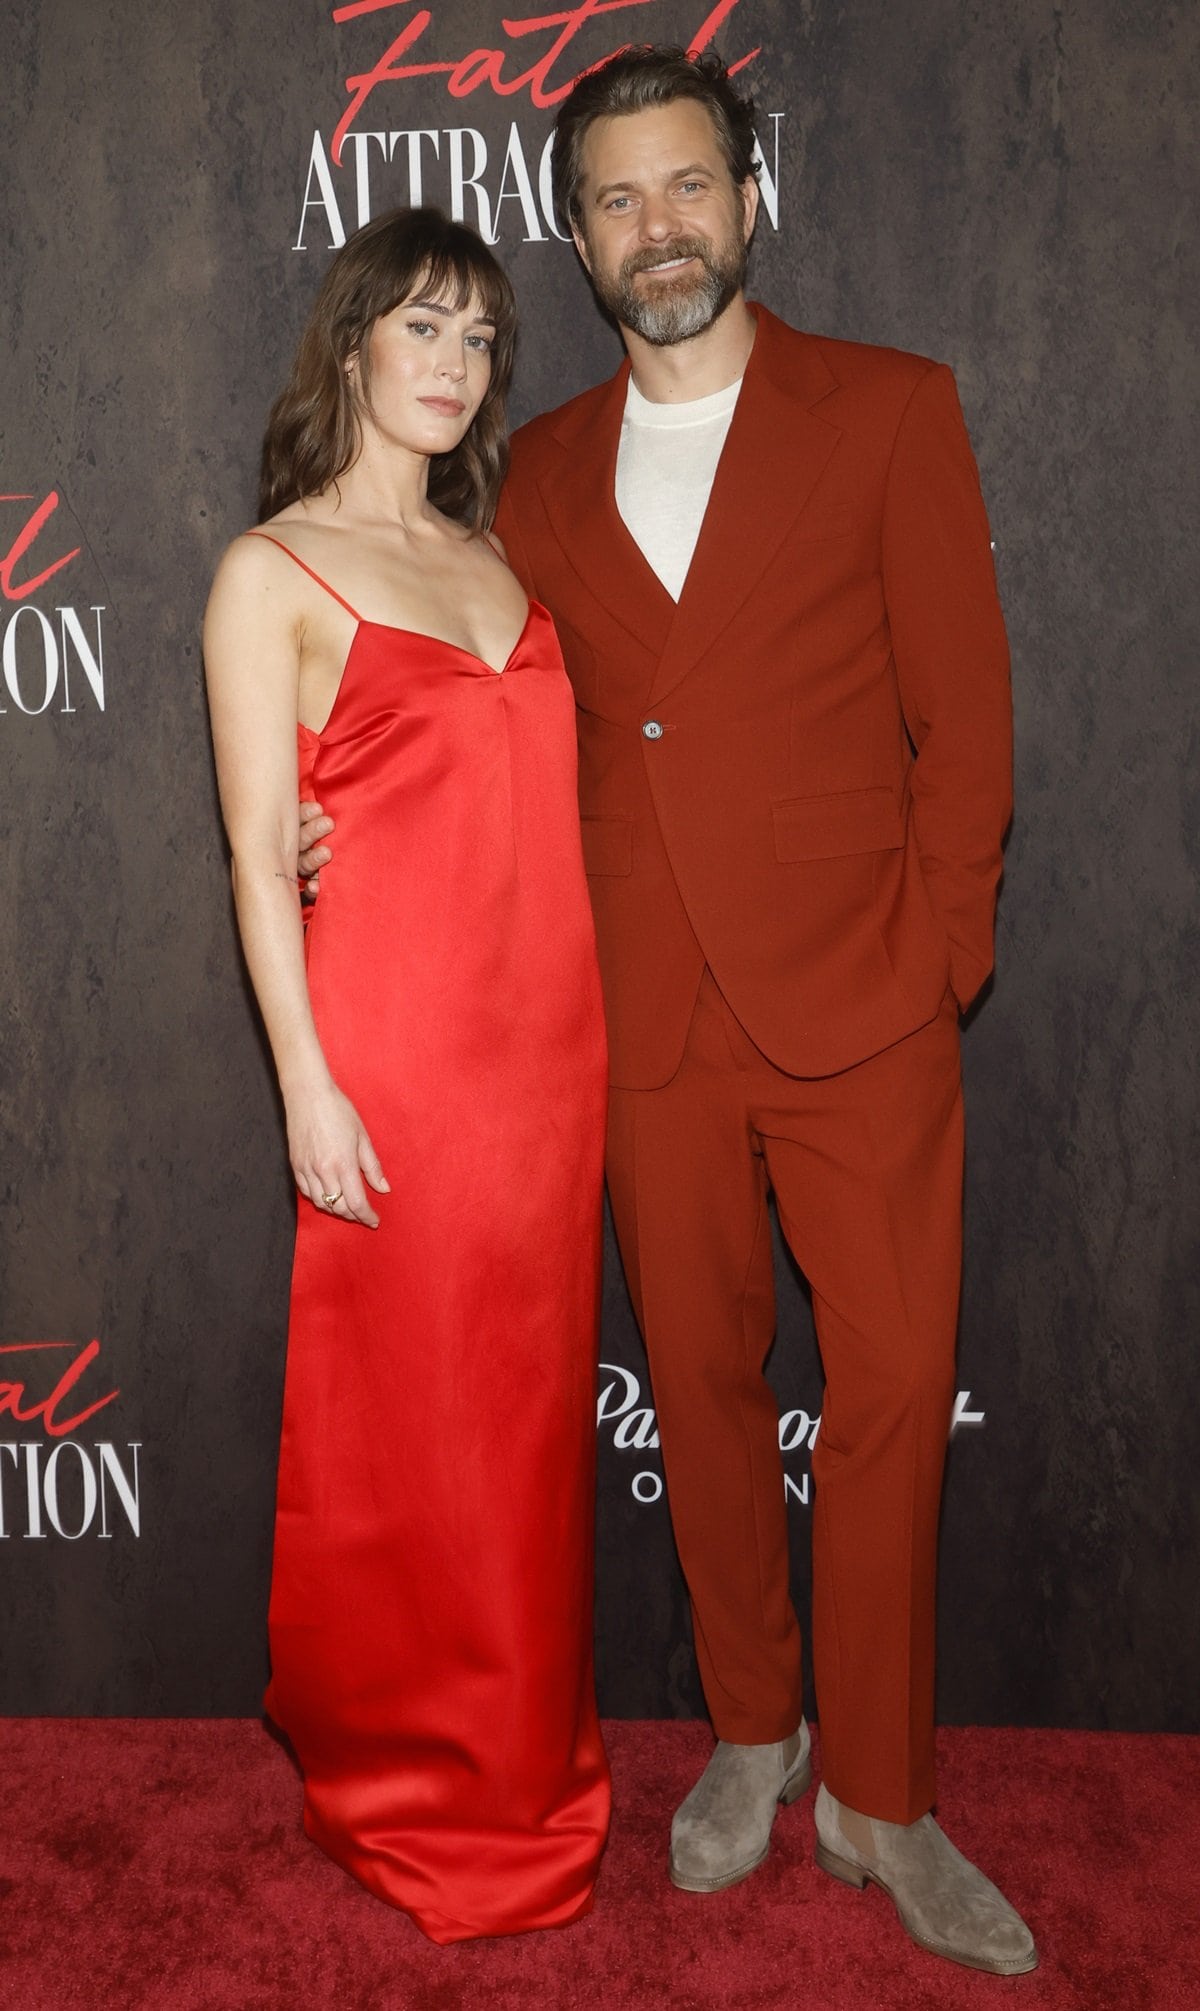 Lizzy Caplan wore a red silk Prada dress, and Joshua Jackson coordinated with her by wearing a red suit at the star-studded Fatal Attraction premiere in Los Angeles on April 24, 2023